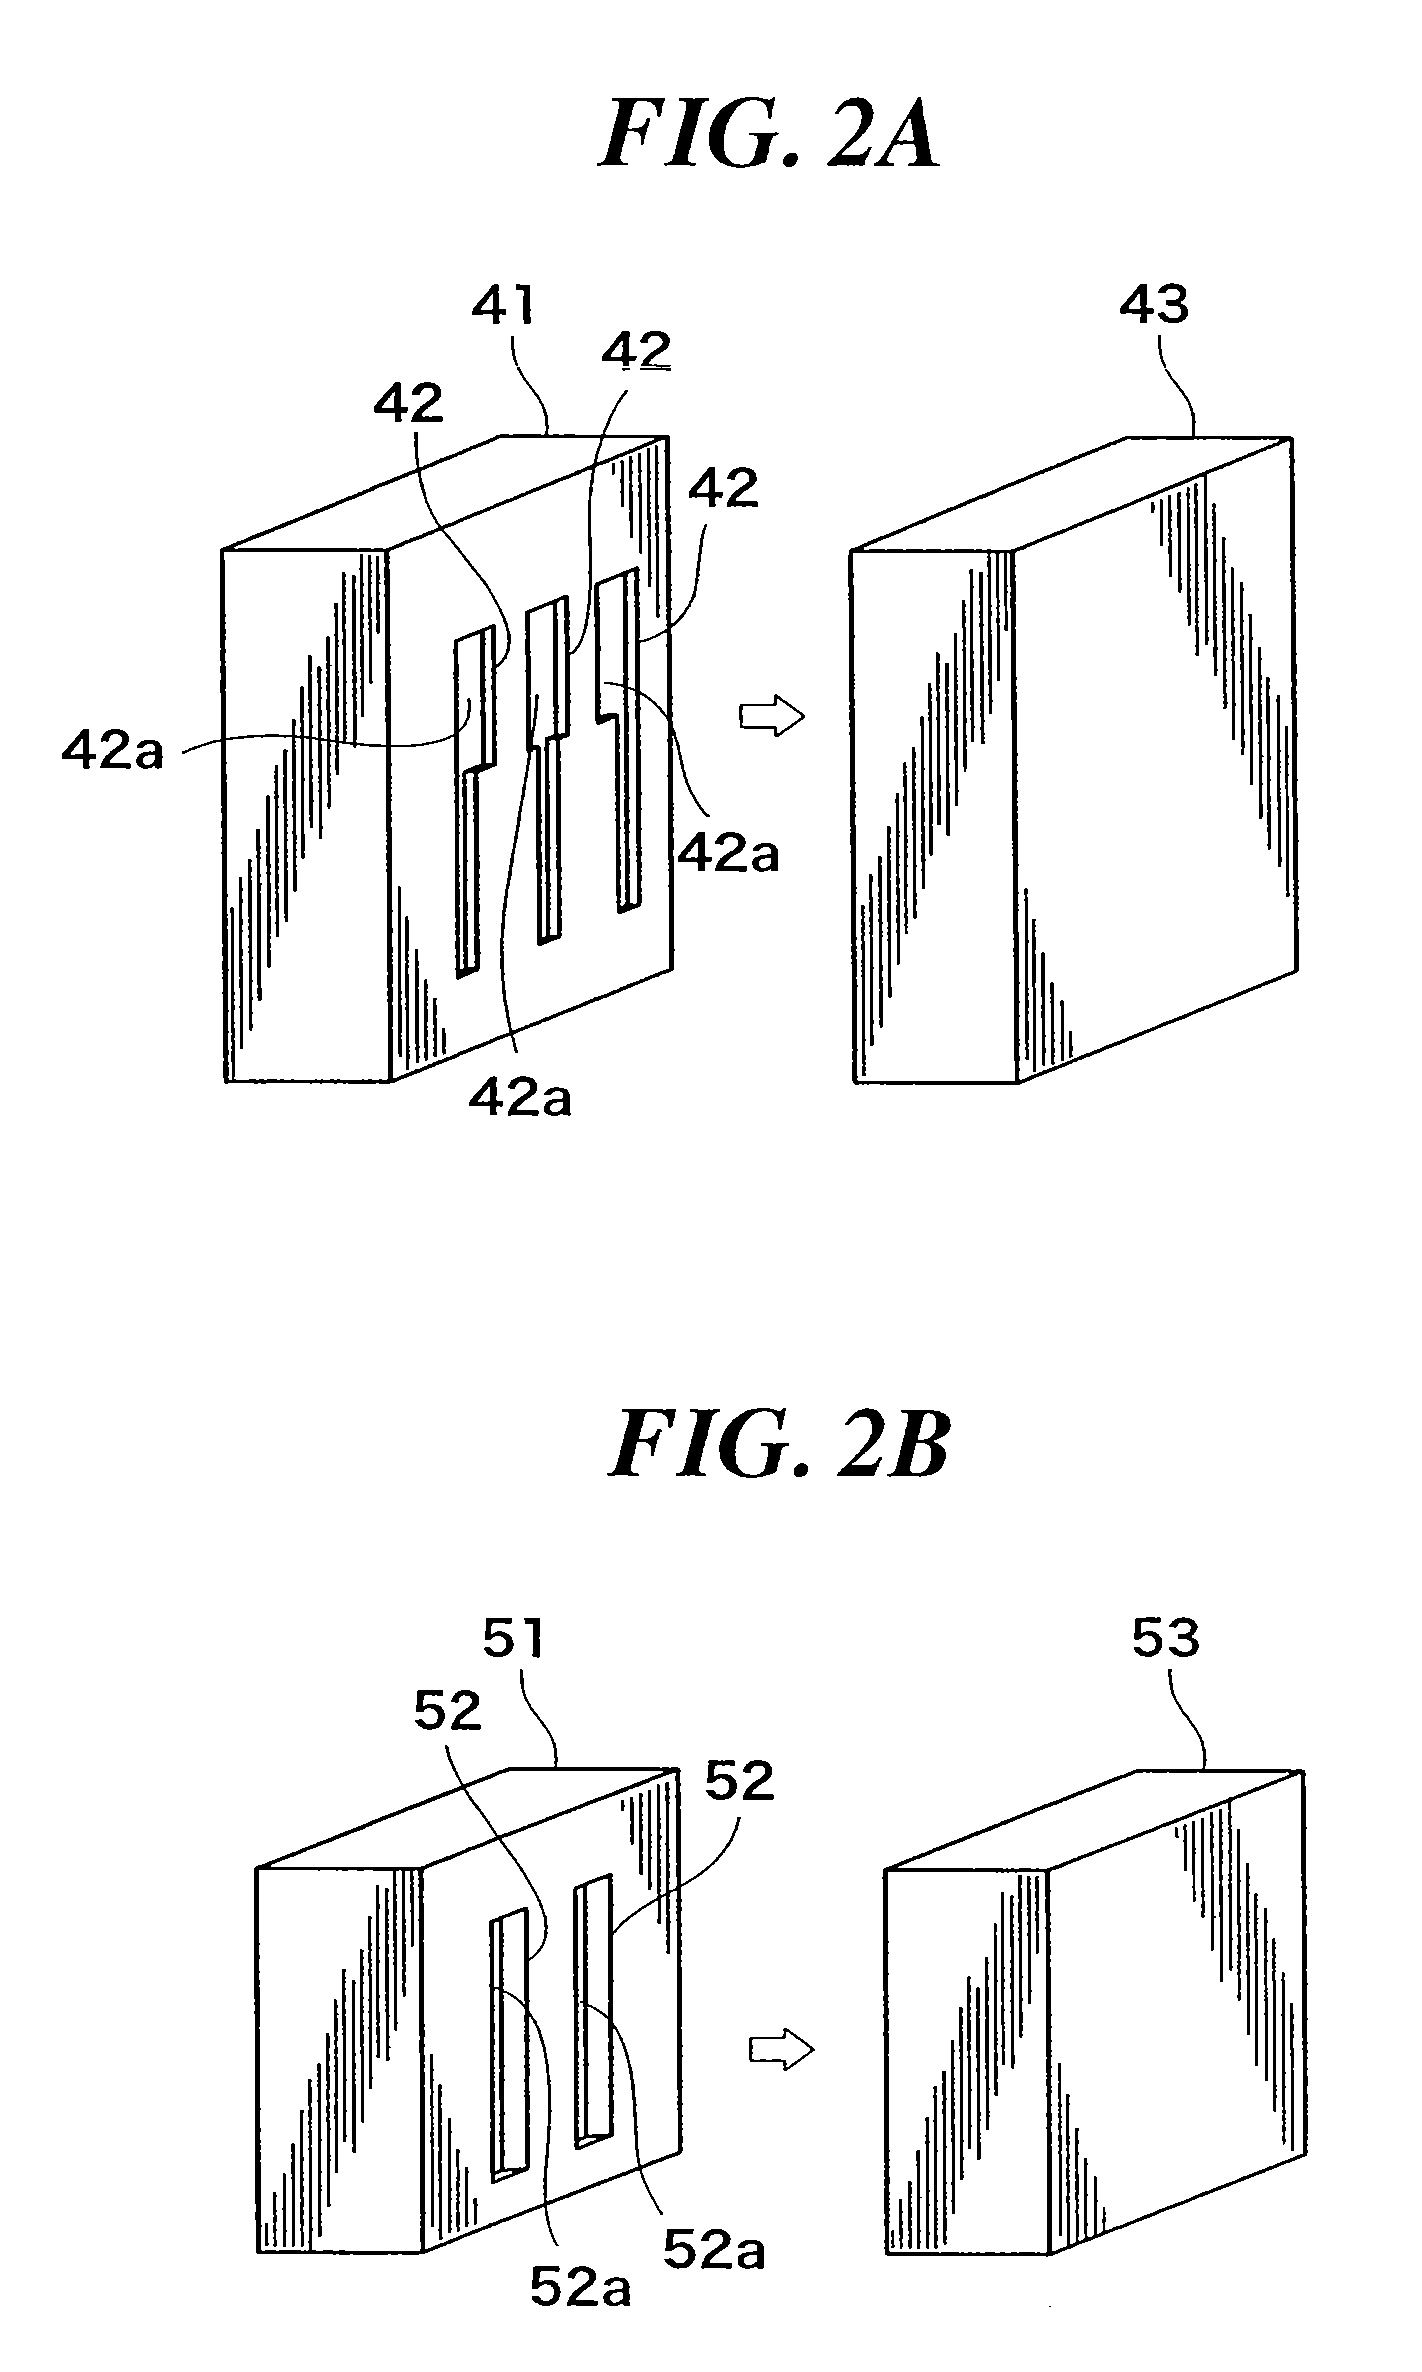 Keyboard apparatus for electronic musical instrument